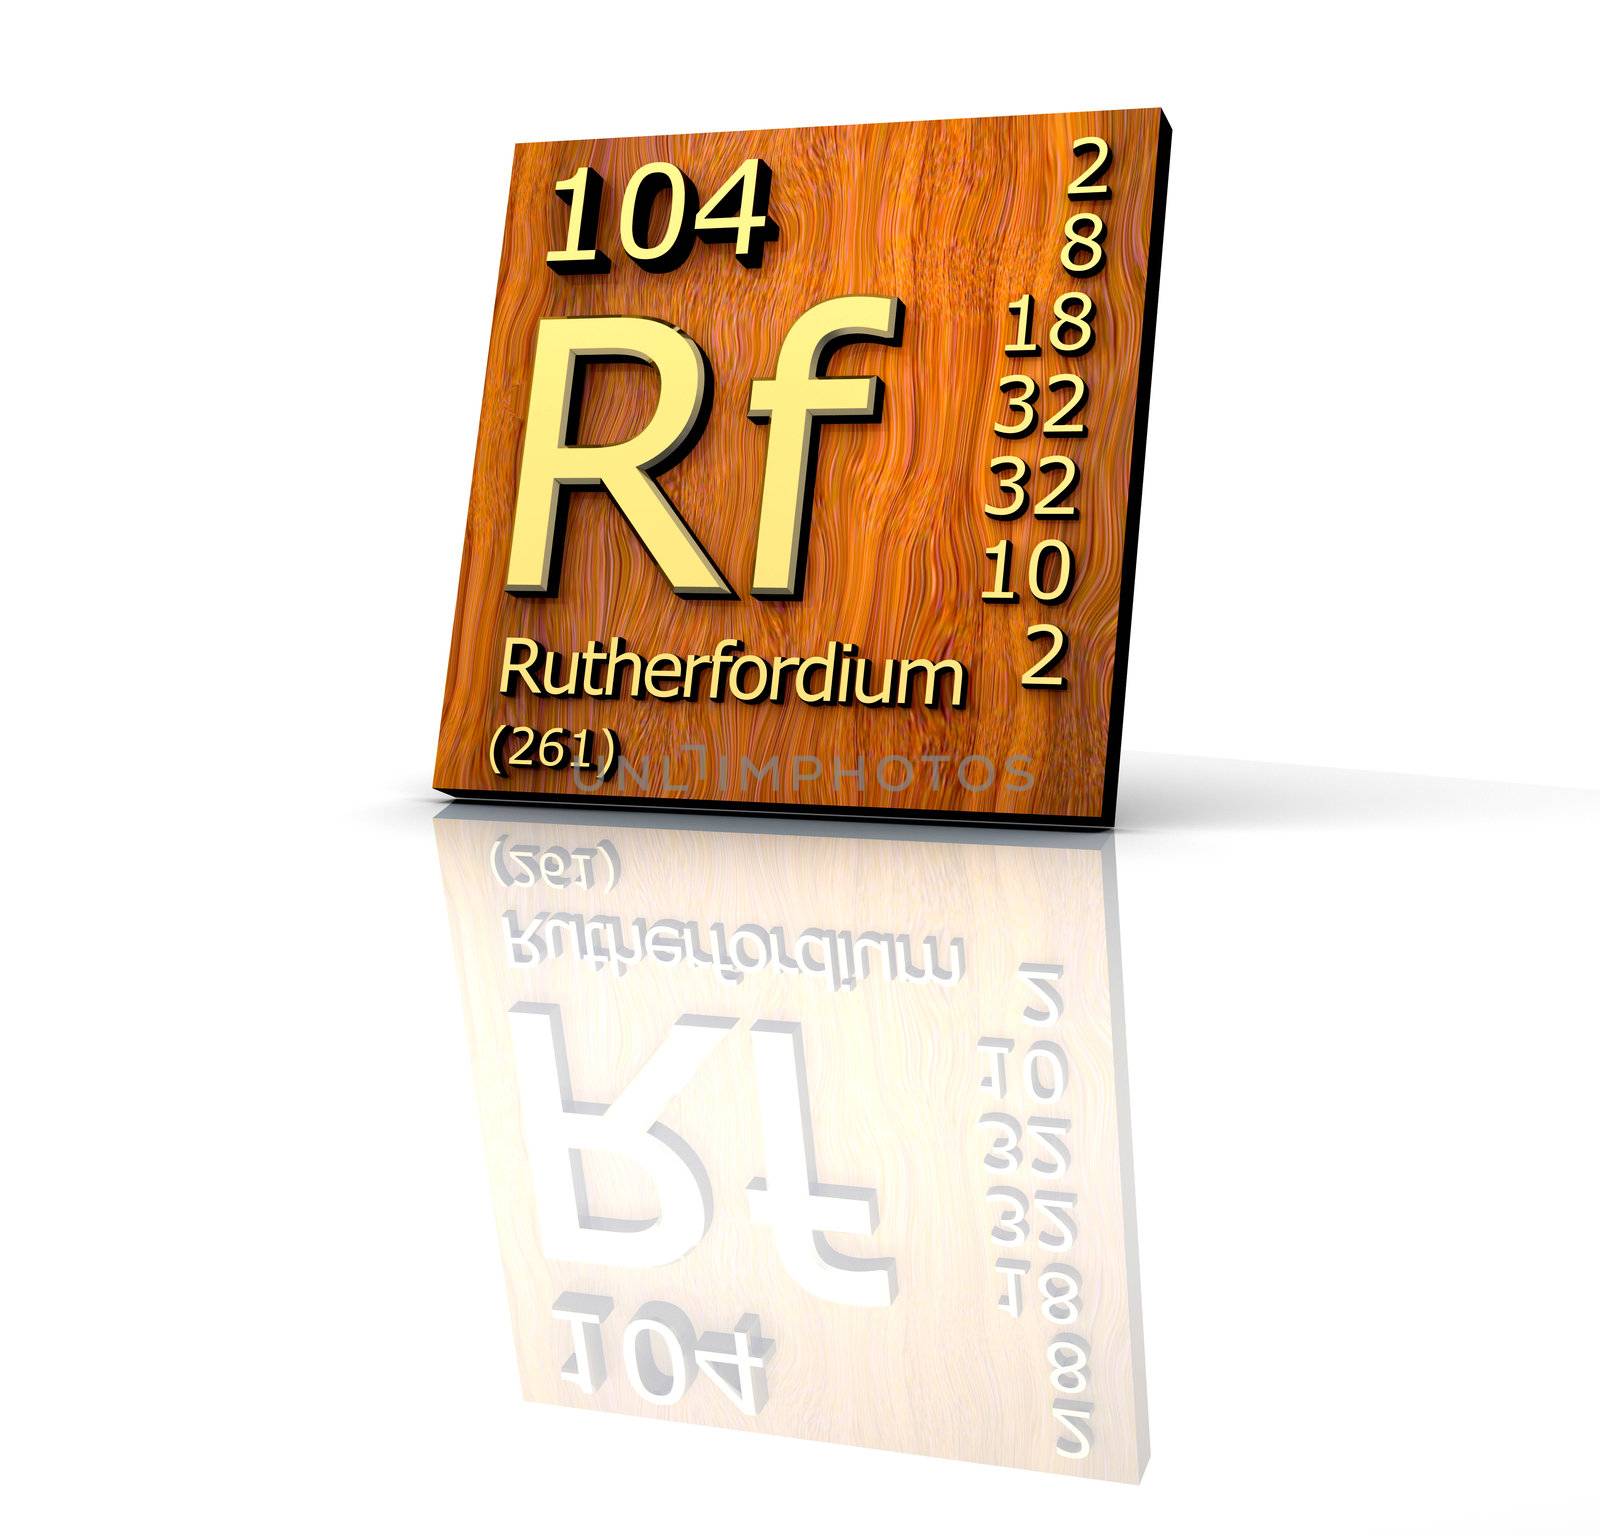 Rutherfordium form Periodic Table of Elements - wood board - 3d made